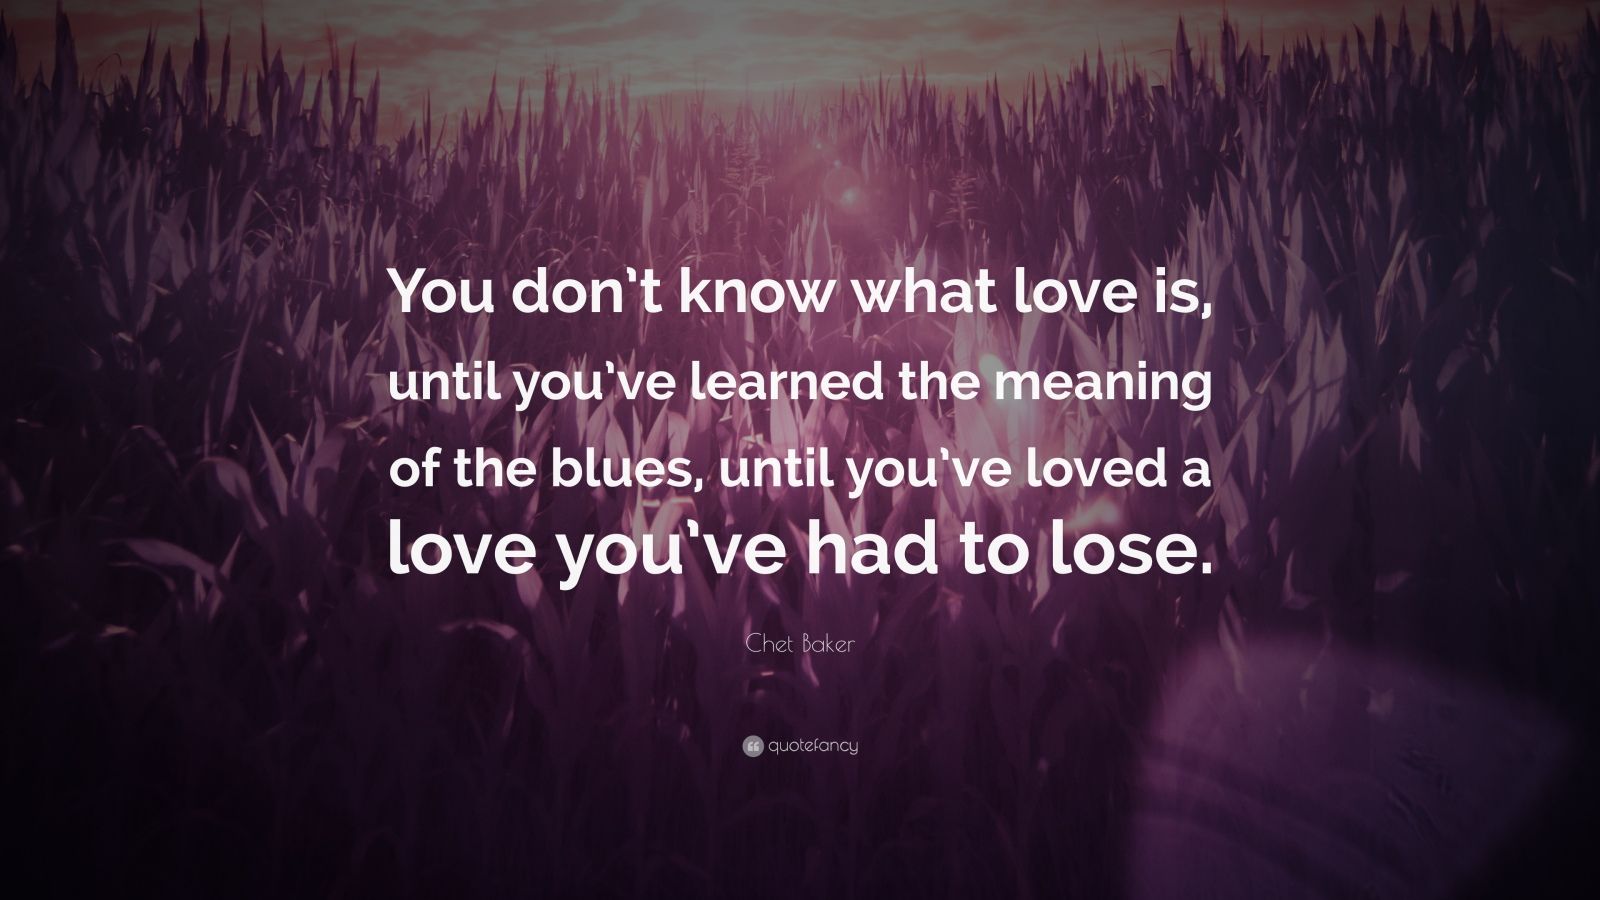 Chet Baker Quote You Don T Know What Love Is Until You Ve Learned The Meaning Of The Blues Until You Ve Loved A Love You Ve Had To Lose 9 Wallpapers Quotefancy